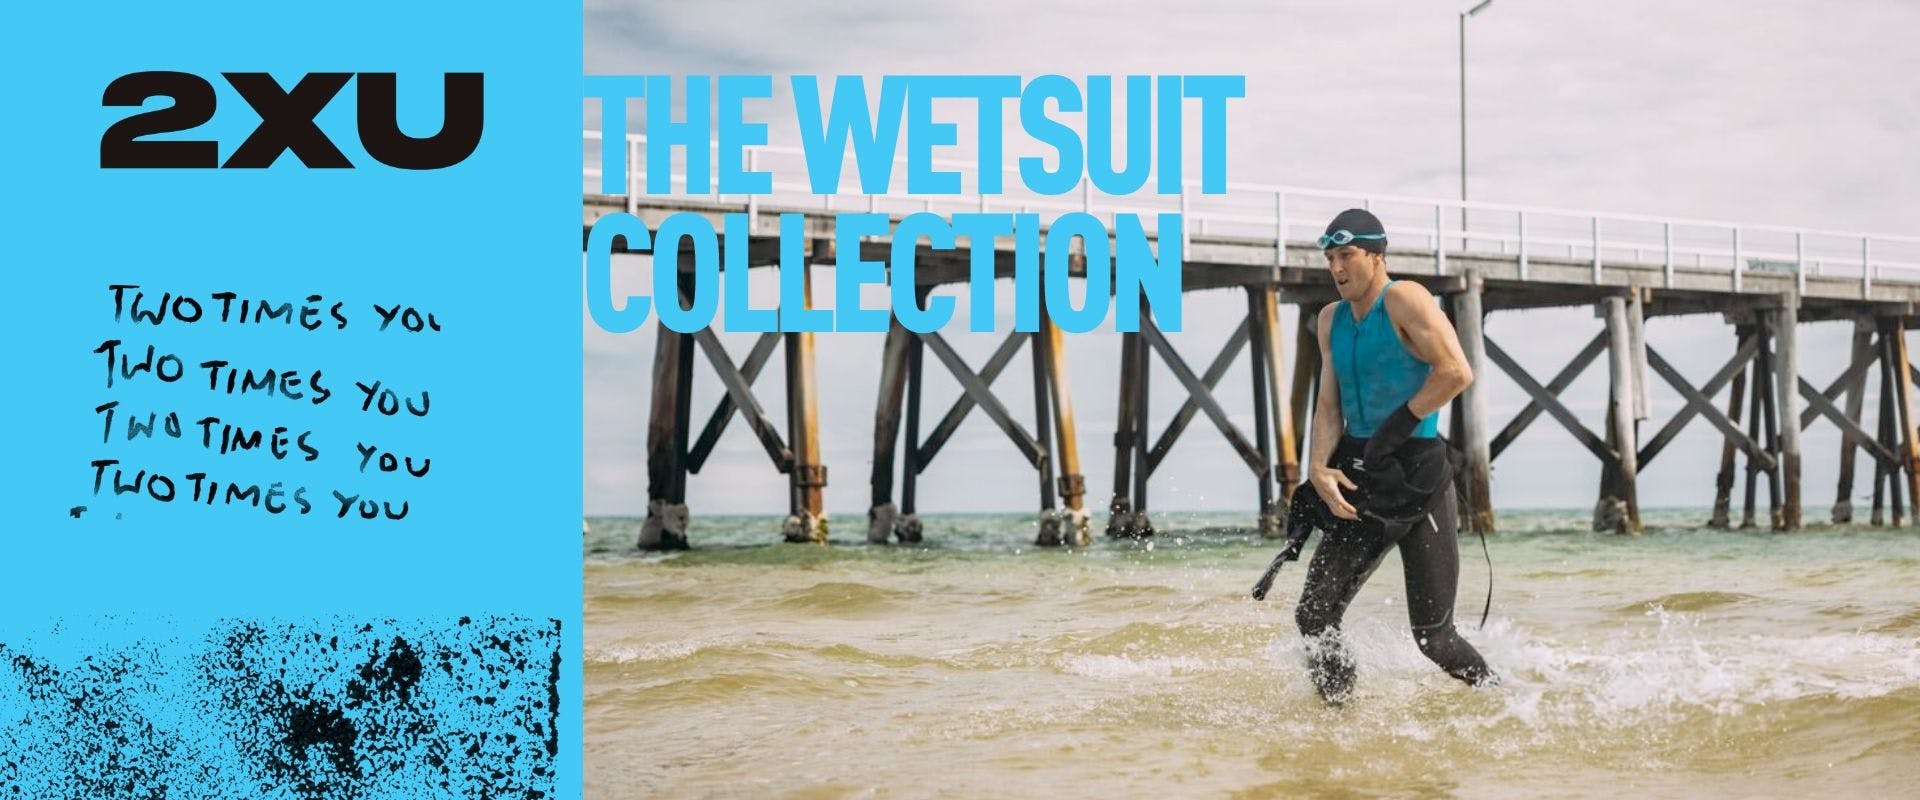 The Wetsuit Collection